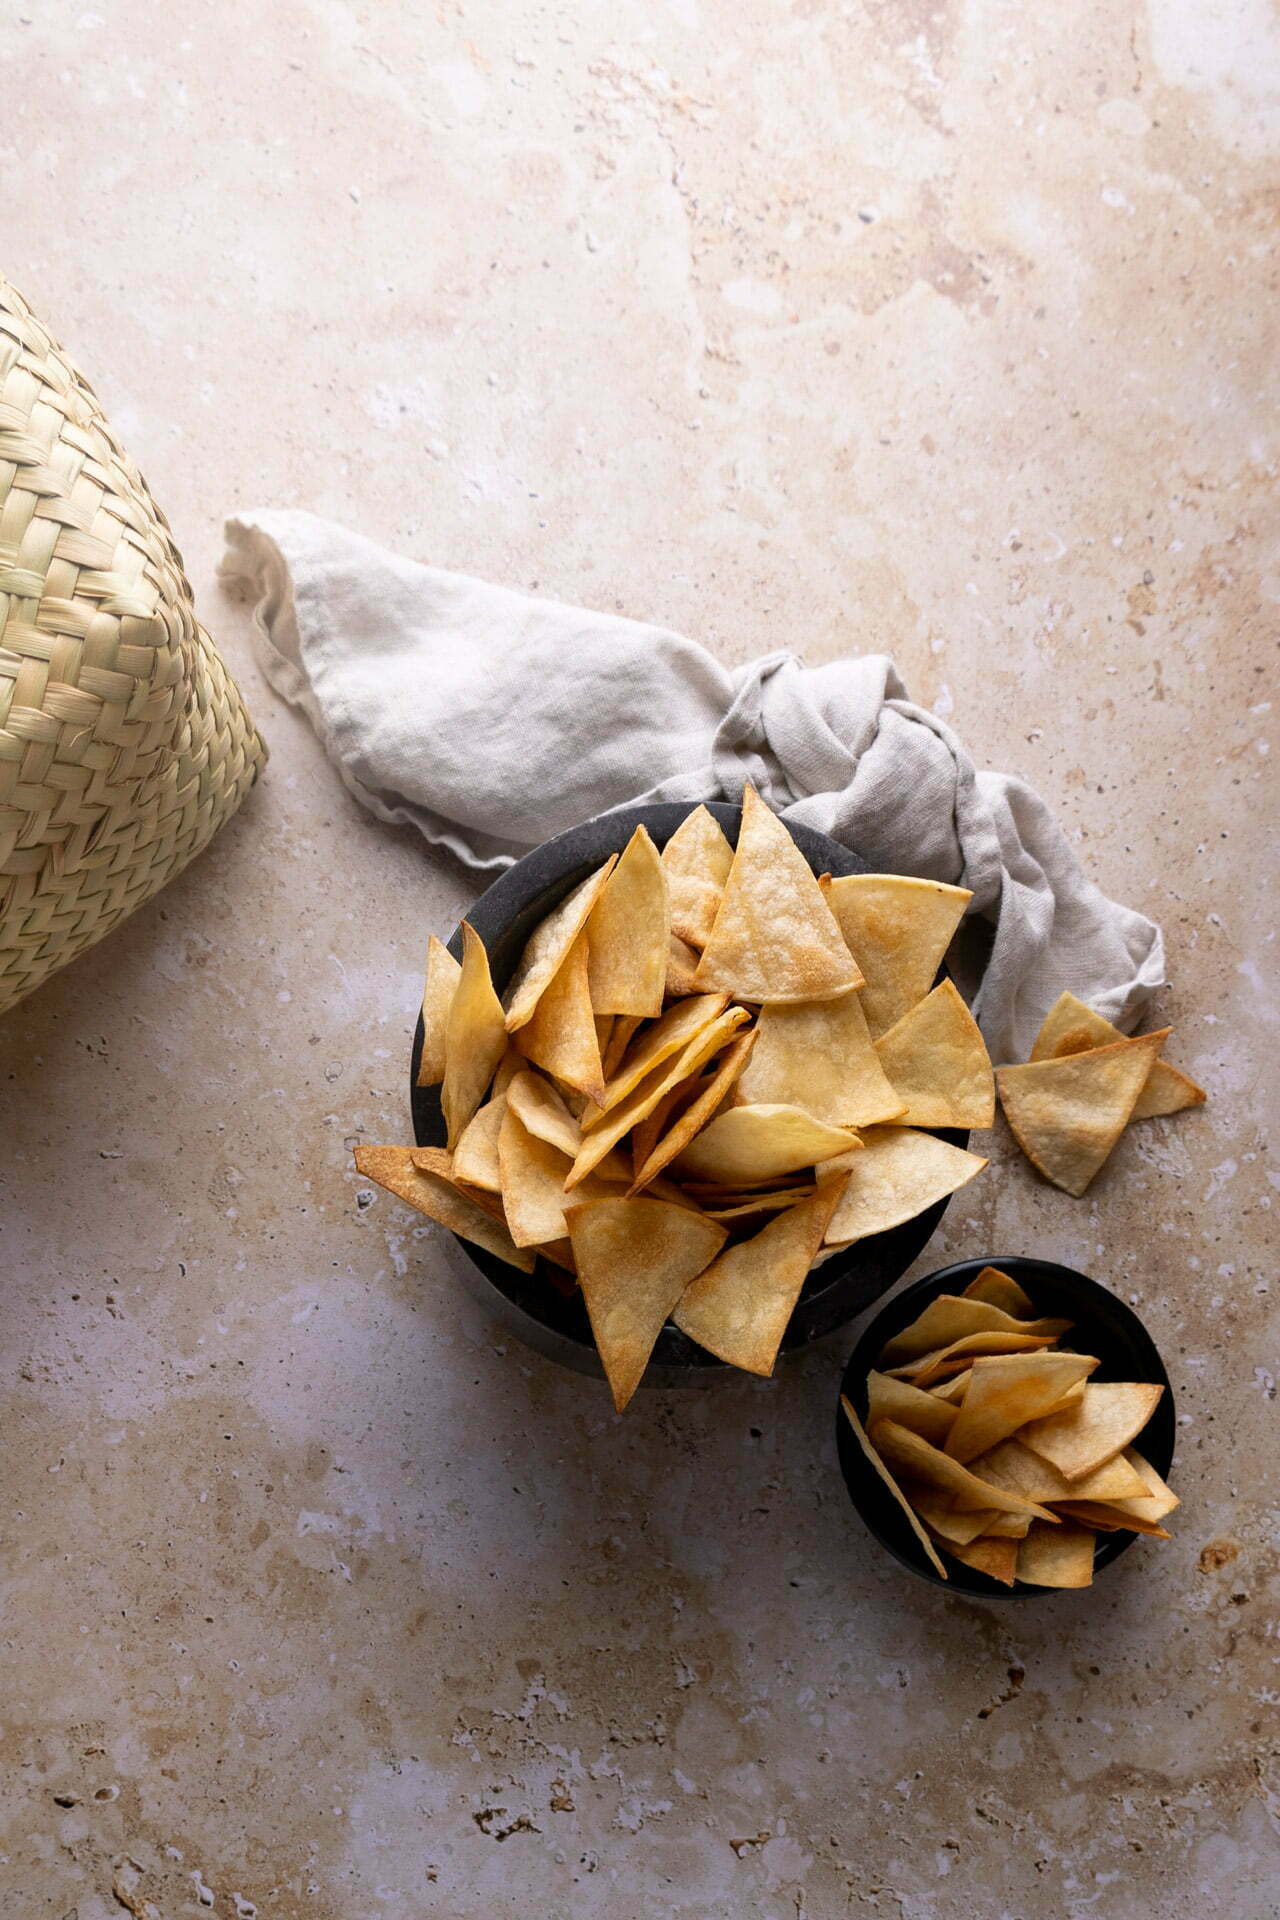 Air Fryer tortilla chips in a bowl on a table.